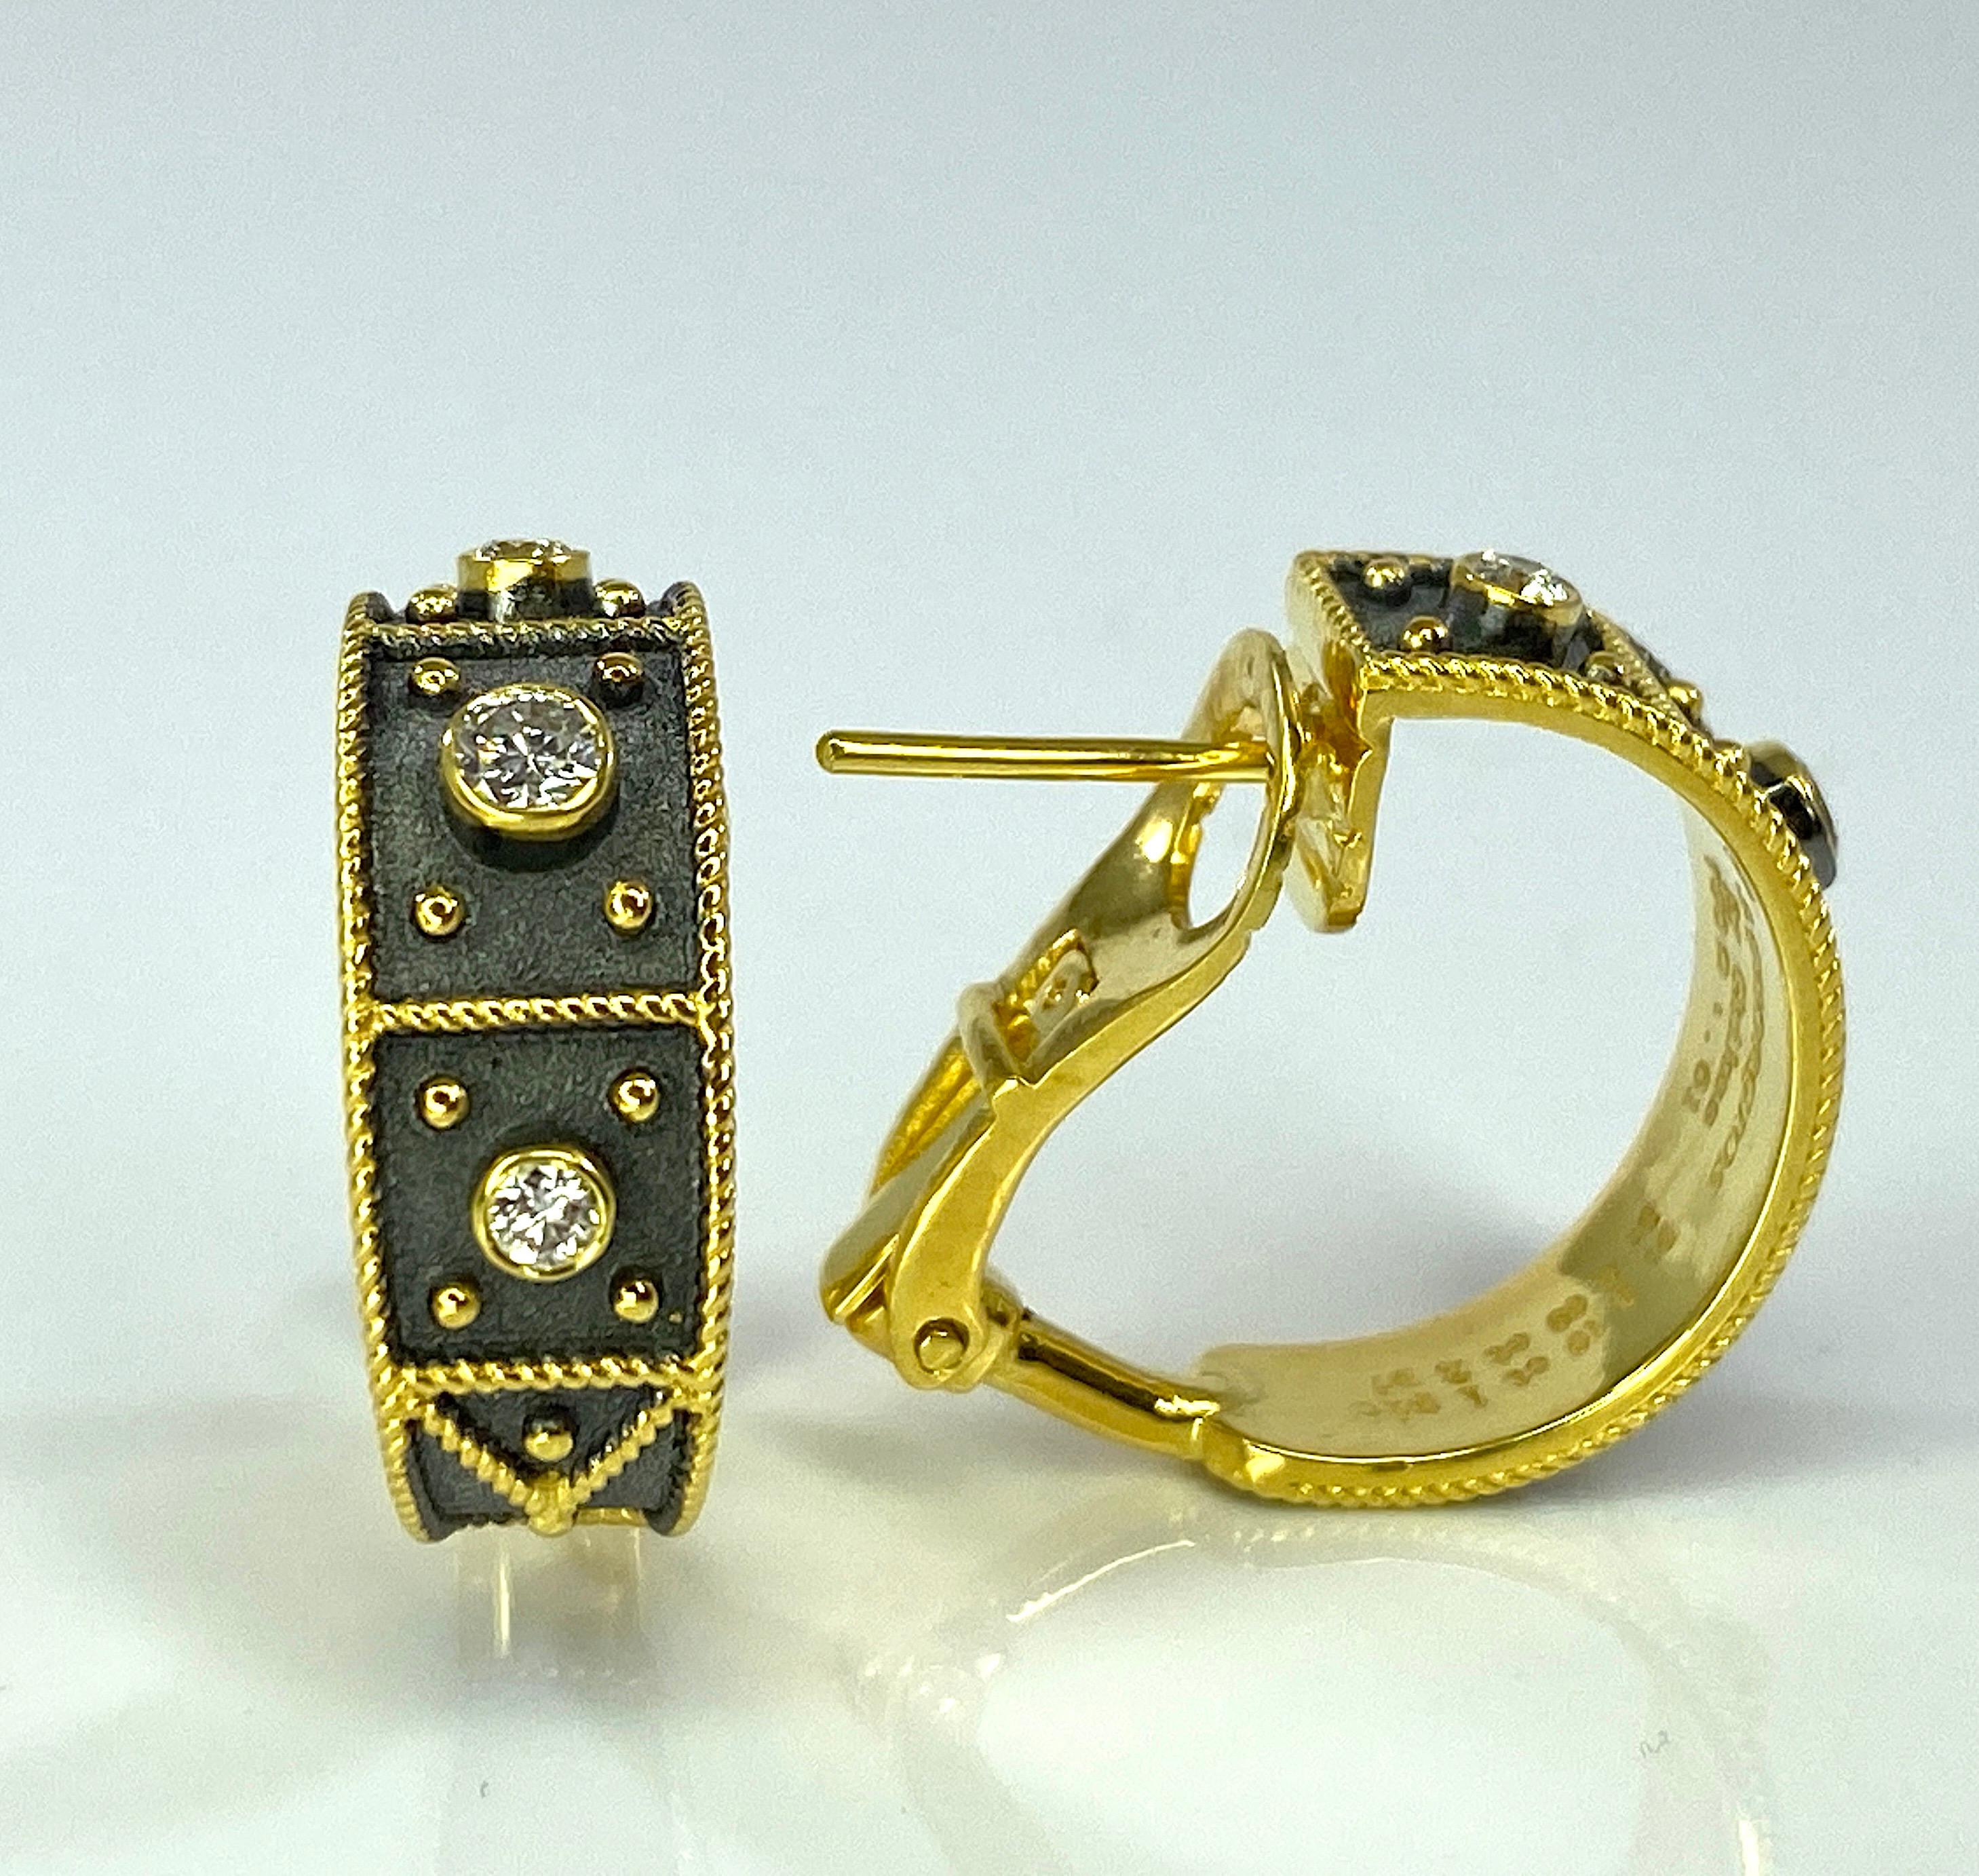 S.Georgios designer earrings are custom crafted from 18 Karat yellow gold and decorated under the microscope in Byzantine style with granulation work and velvet background. Earrings feature 0.36 Carats of brilliant cut white diamonds. These gorgeous